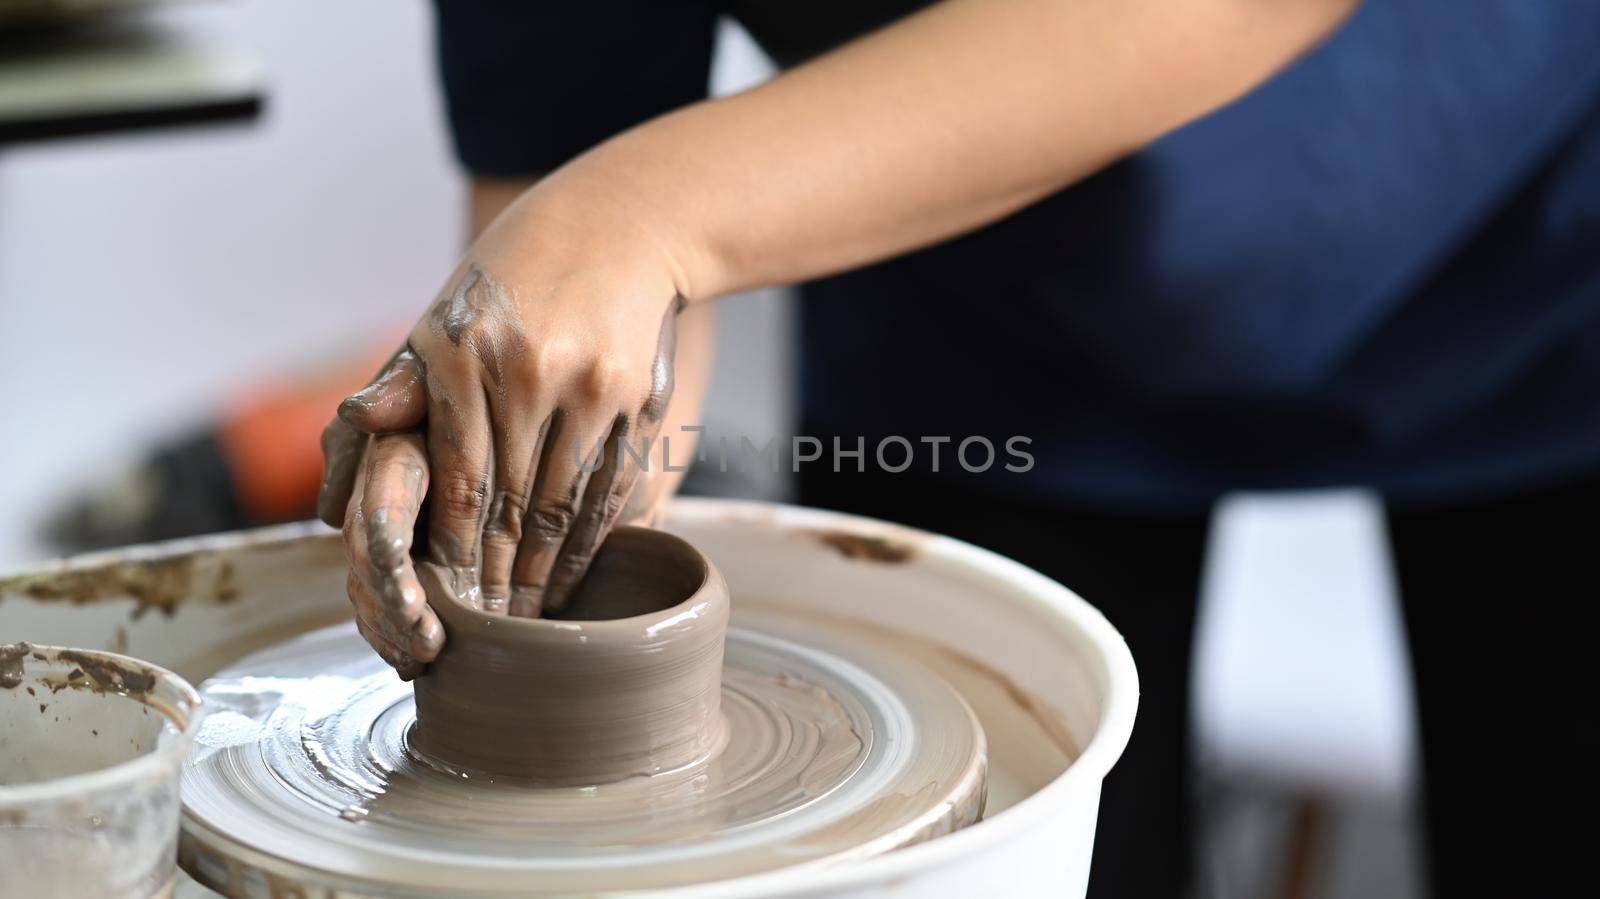 Close up view woman creating handmade ceramic bowl on pottery wheel in workshop. Indoors lifestyle activity, handicraft, hobbies concept.